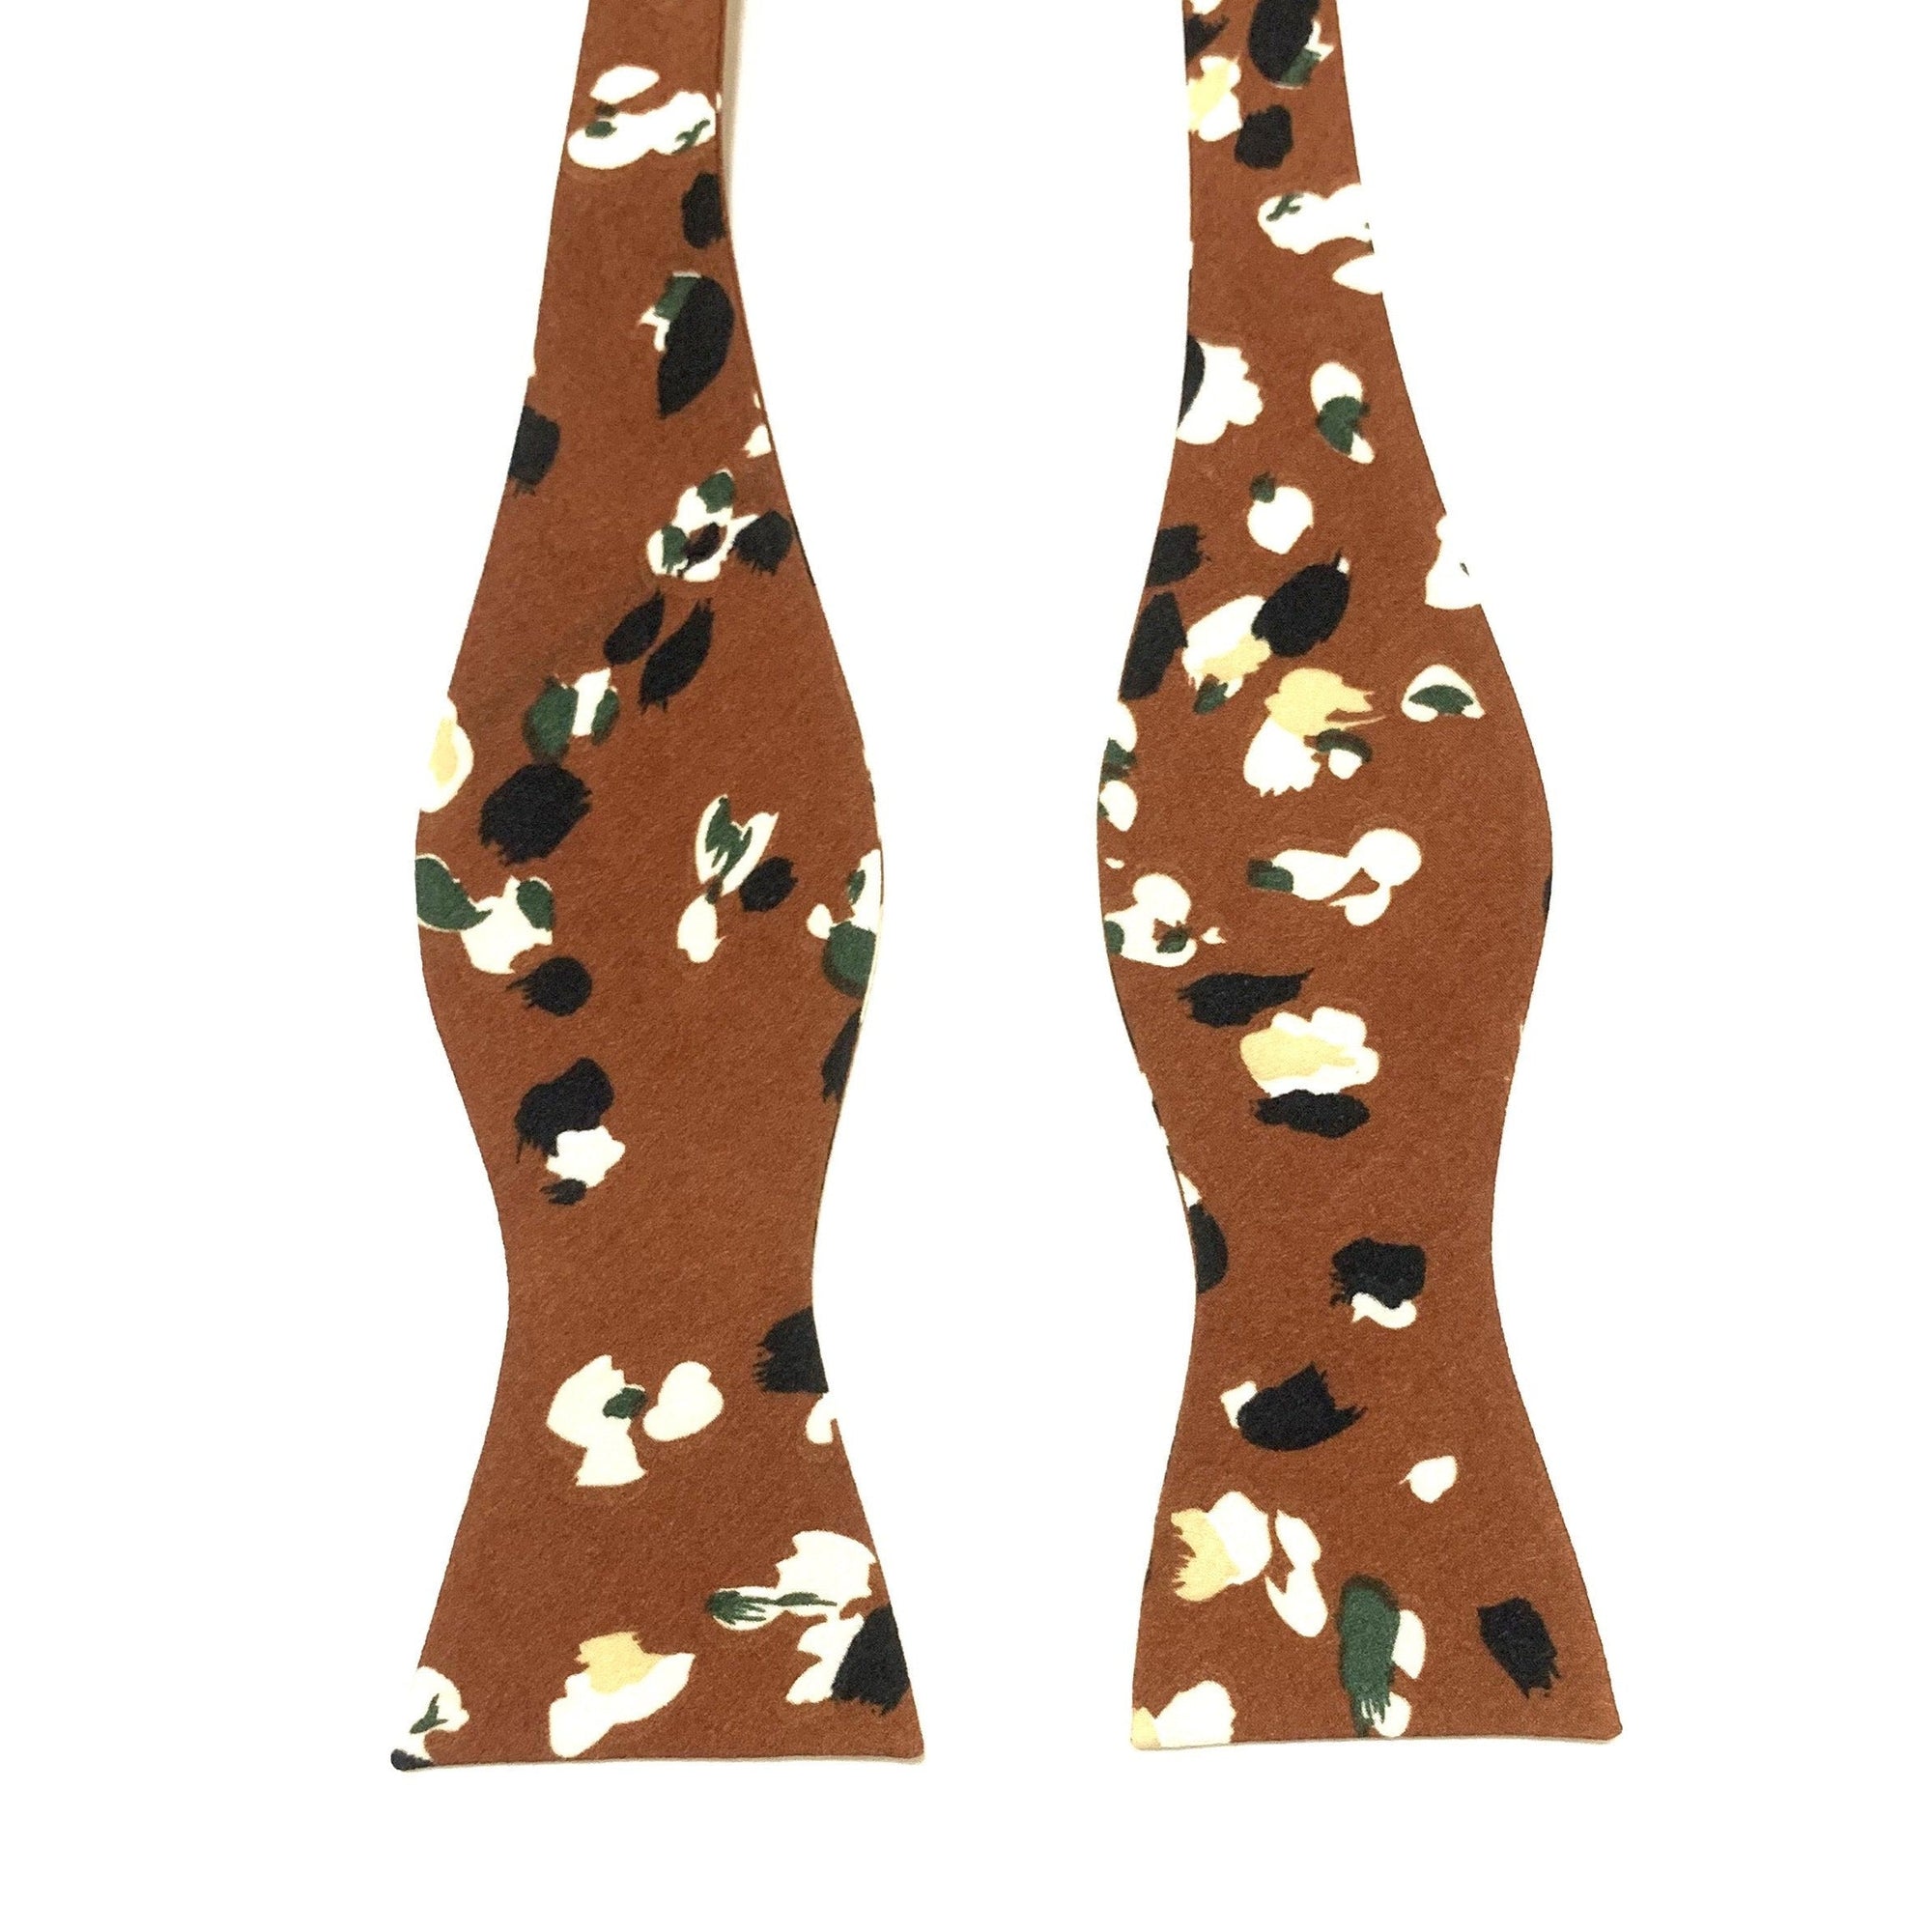 Terracotta Floral Bow Tie Self Tie PHOEBE - MYTIESHOP-Terracotta Floral Bow Tie Self Tie 100% Cotton Flannel Handmade Adjustable to fit most neck sizes 13 3/4&quot; - 18&quot; A dapper addition to any outfit, this PHOEBE bow tie is perfect for any formal occasion. With a floral pattern and self-tie design, this bow tie is perfect for taking your style up a notch. Whether you&#39;re dressing up for a wedding or dinner party, or just want a polished look for your next photo shoot, this bow tie will have you loo